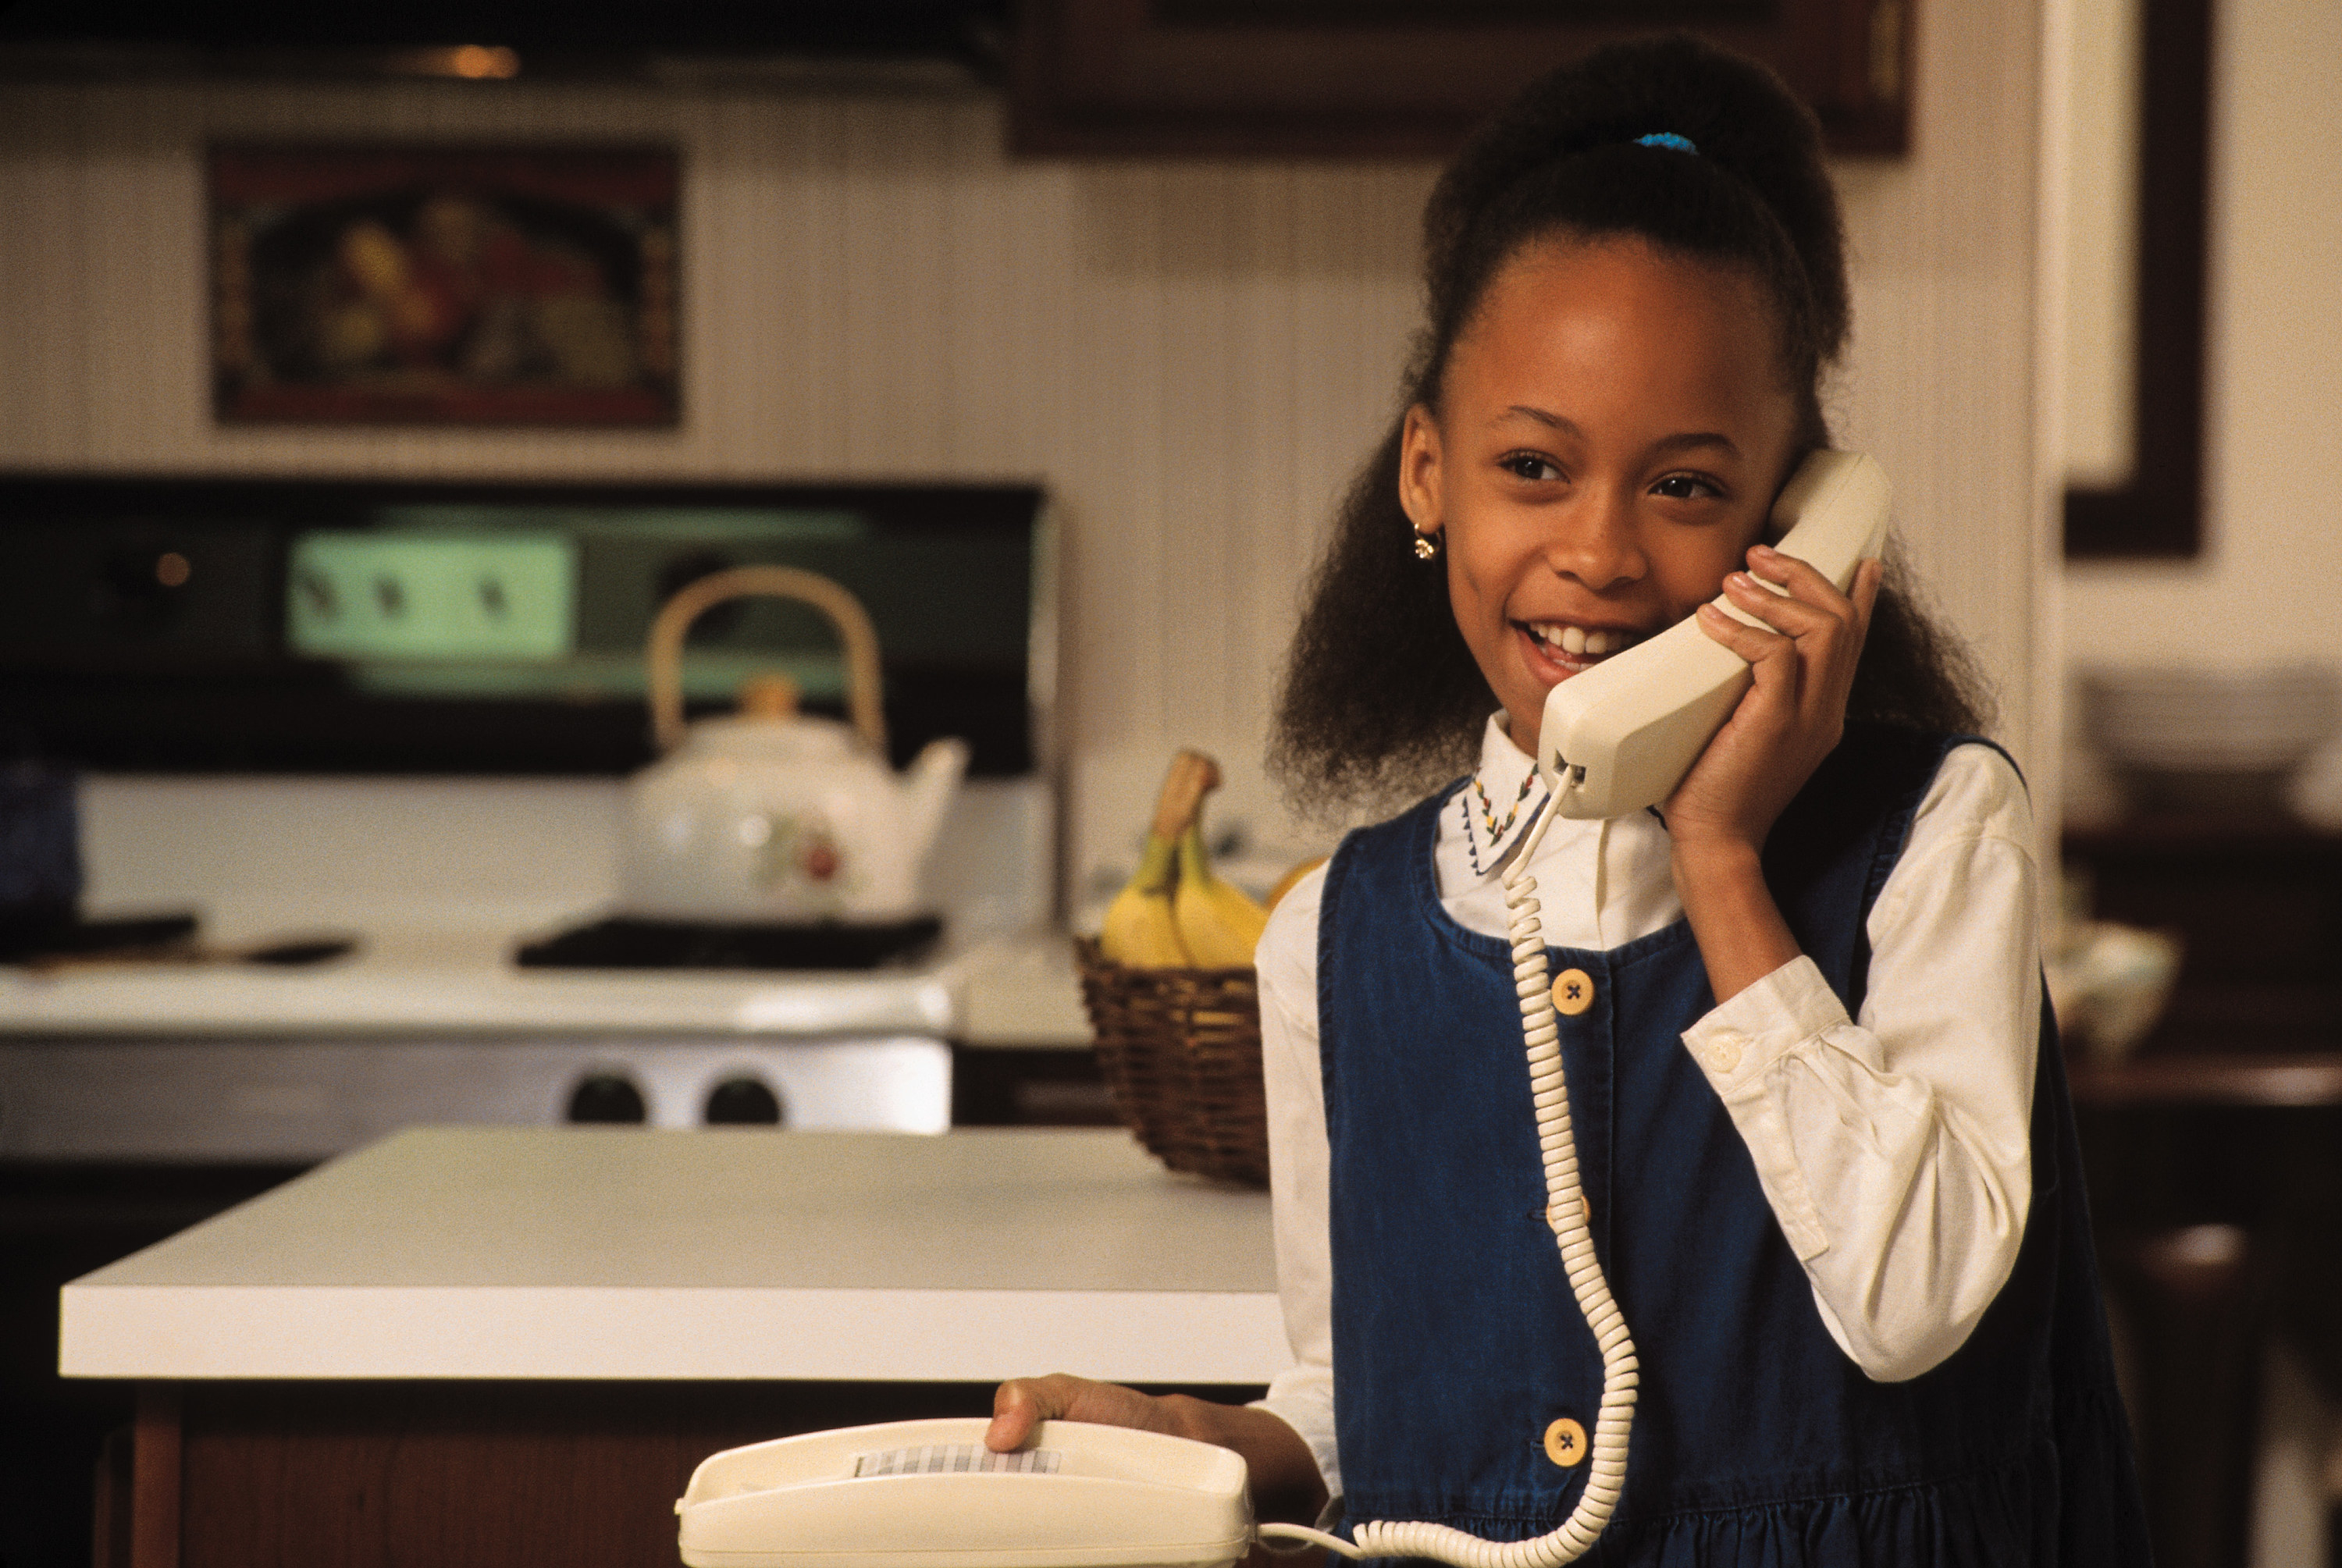 Little girl talking on the phone in her kitchen